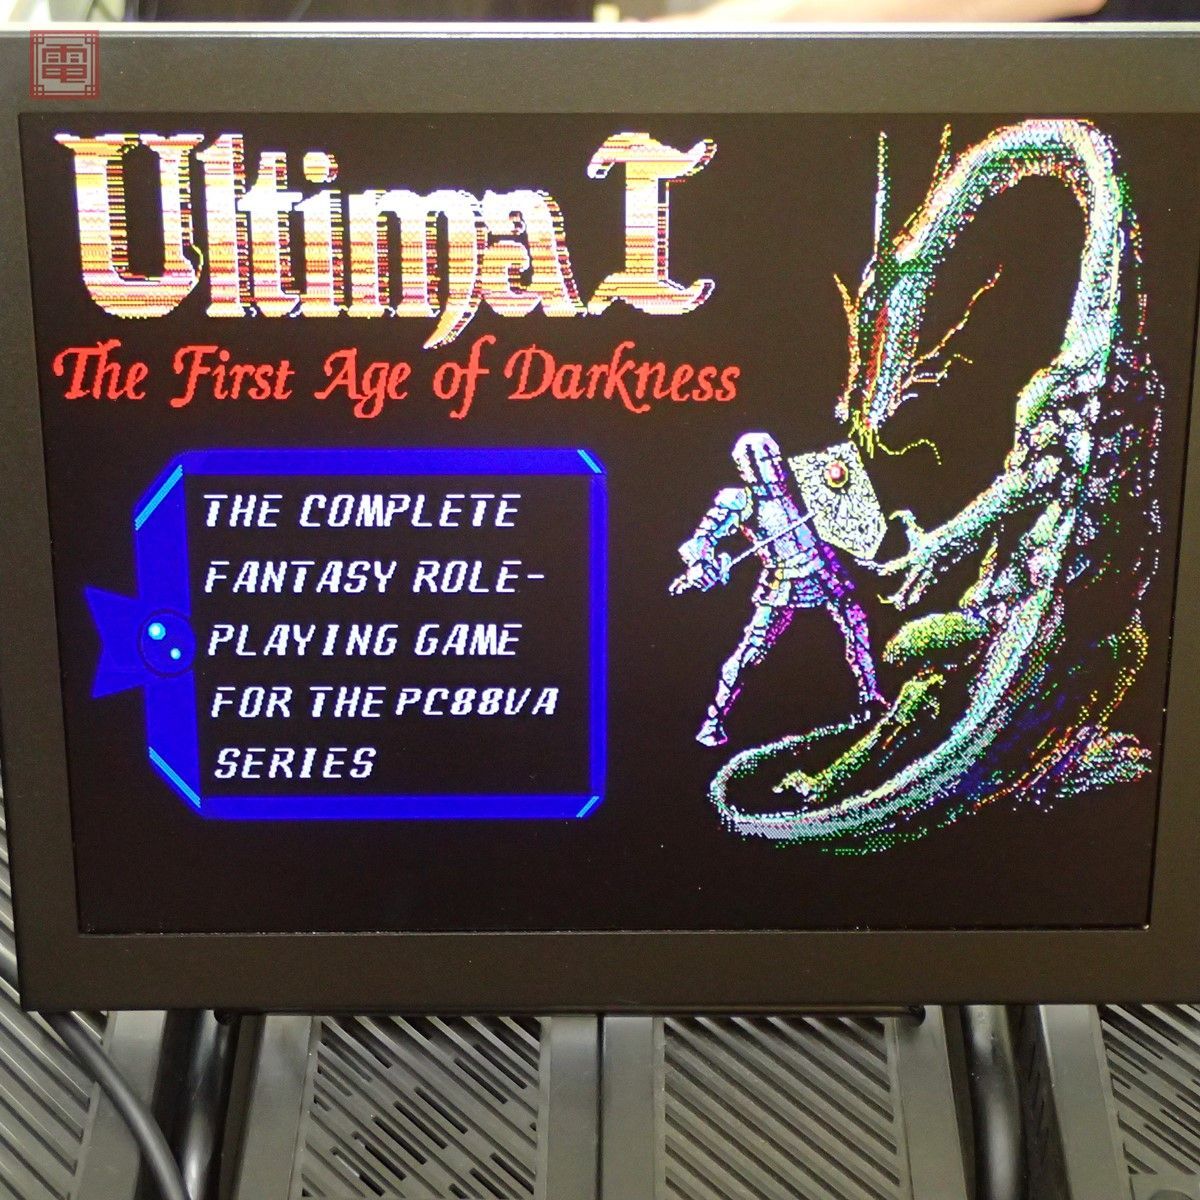 PC-8801 VA exclusive Ultima 1 The First Age of Darkness w/Manual, box set-f0724-